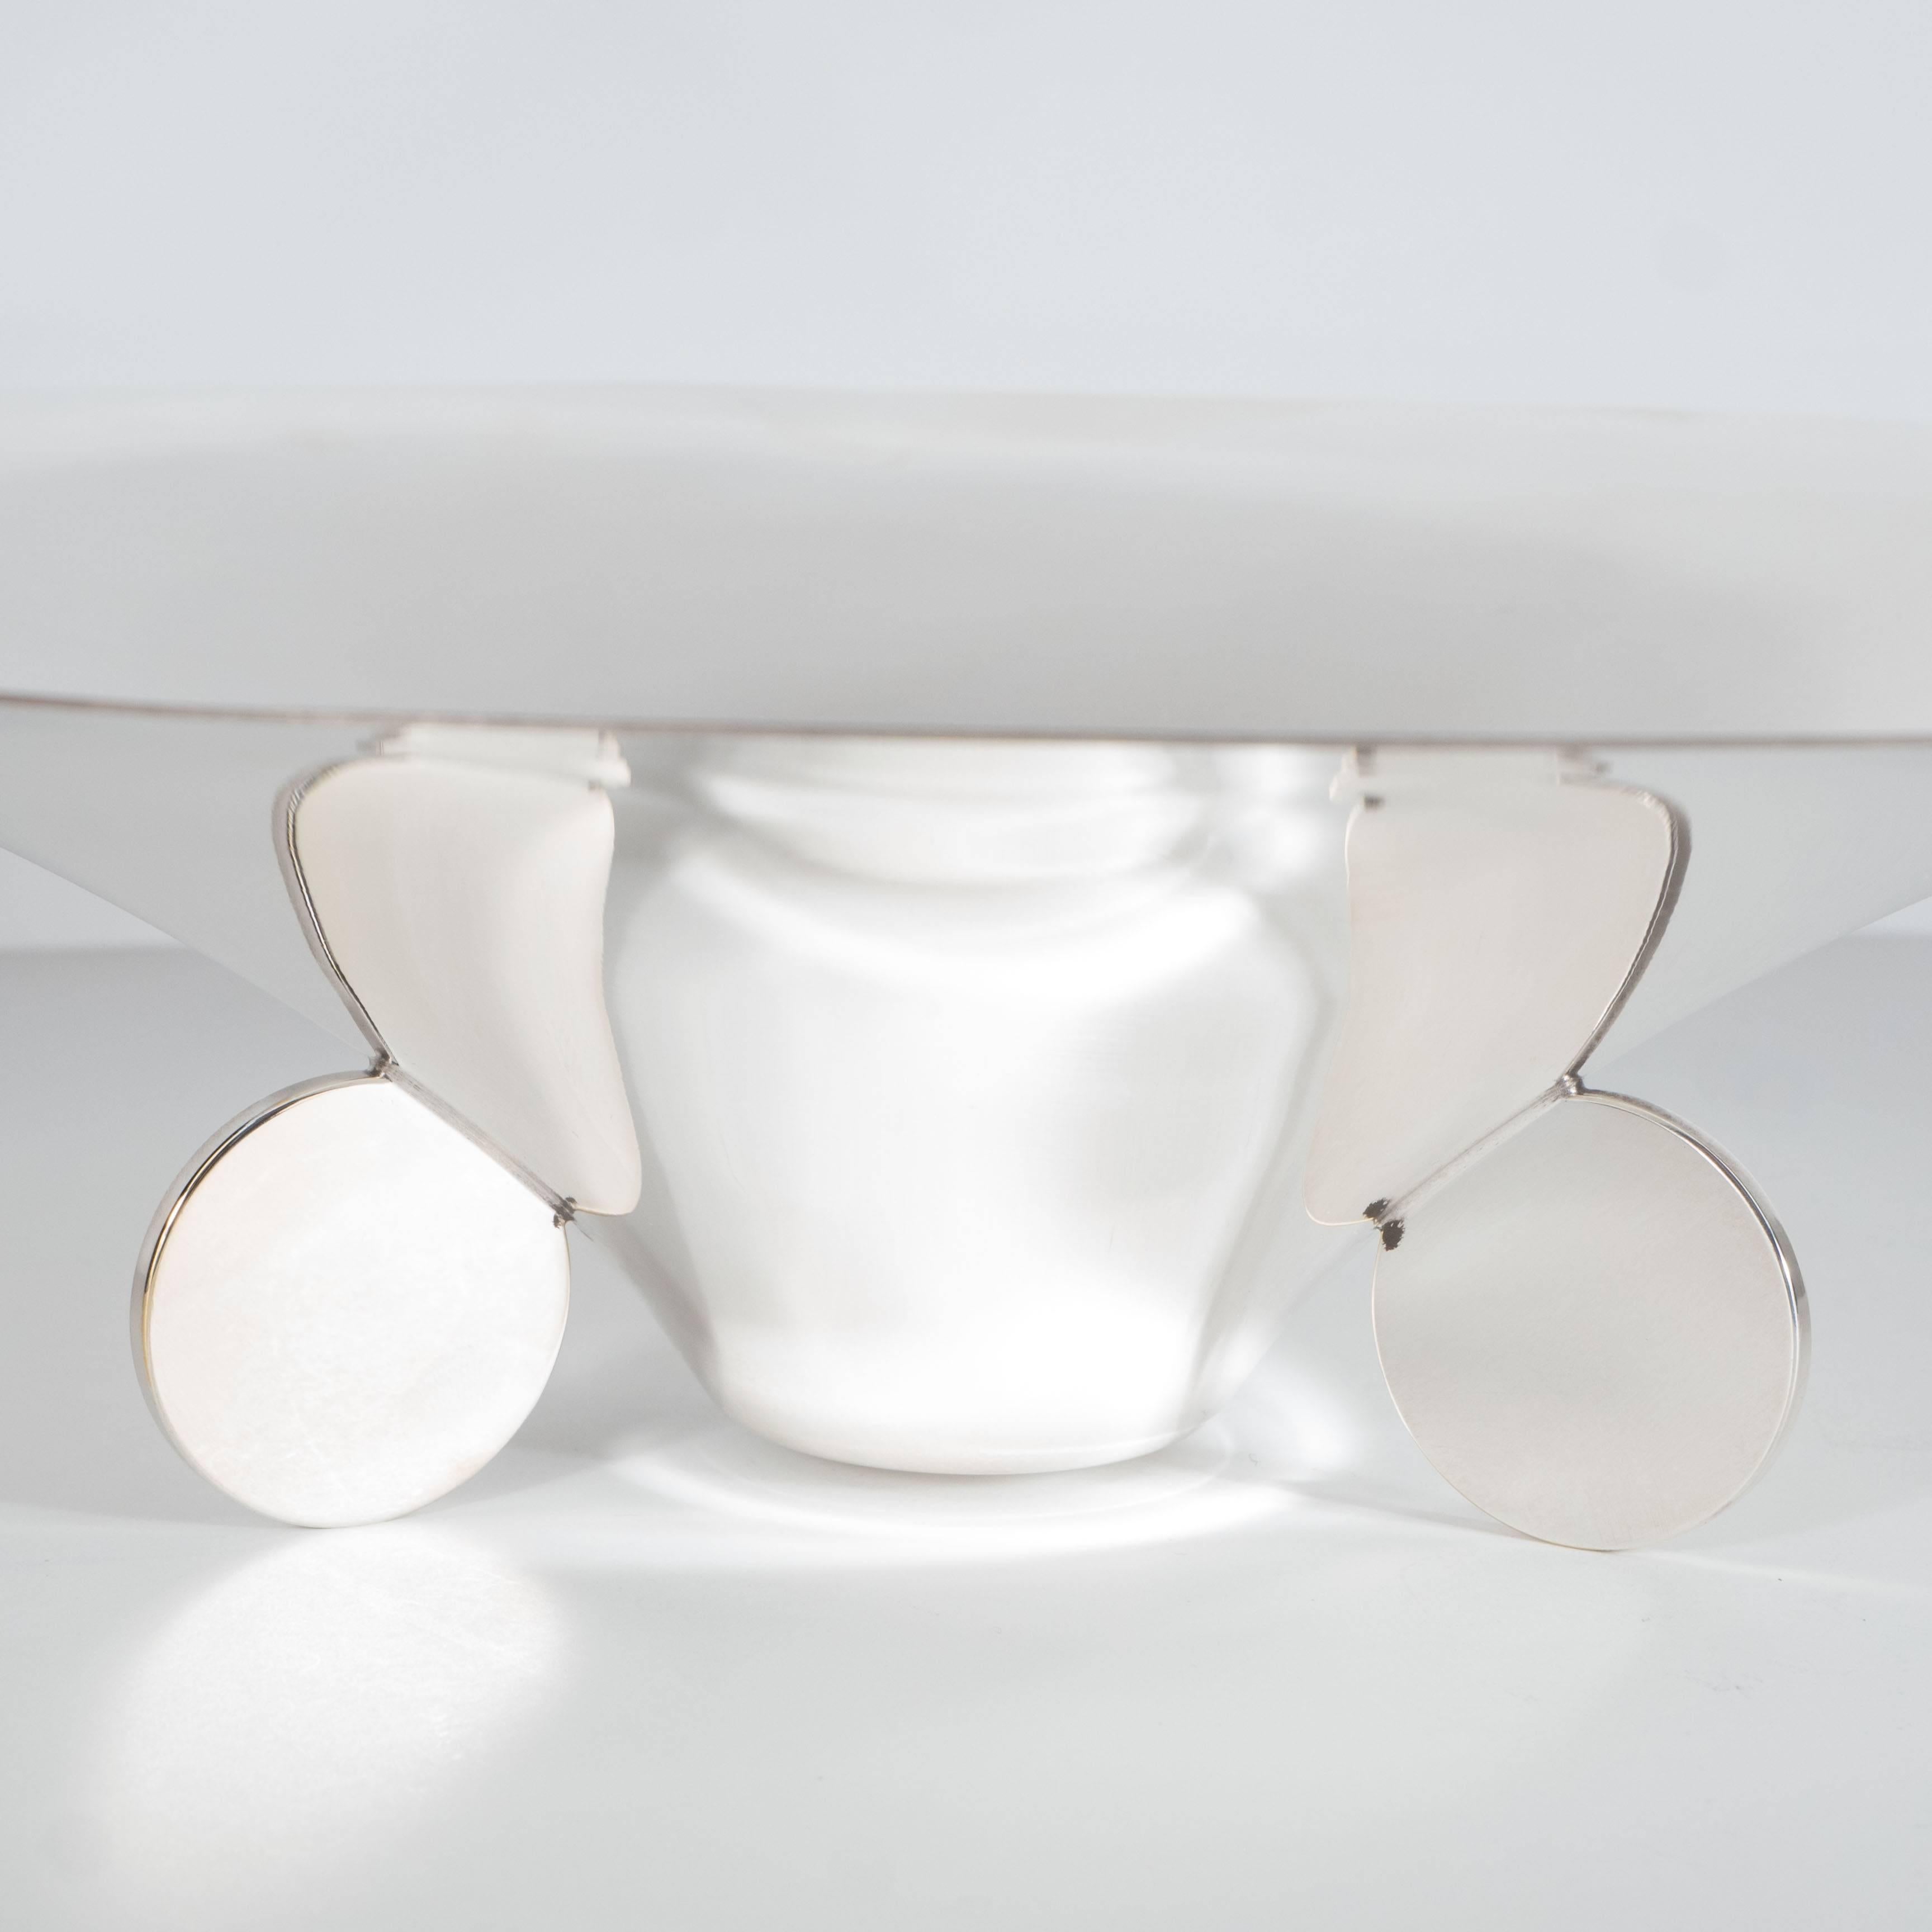 This elegant Art Deco silver plate bowl or dish was realized by the fabled design firm Ikora in Germany circa 1930. It offers a sculptural concave form funnel-shaped dish with a flat bottom is adorned by a trio of flat circular support disks. This